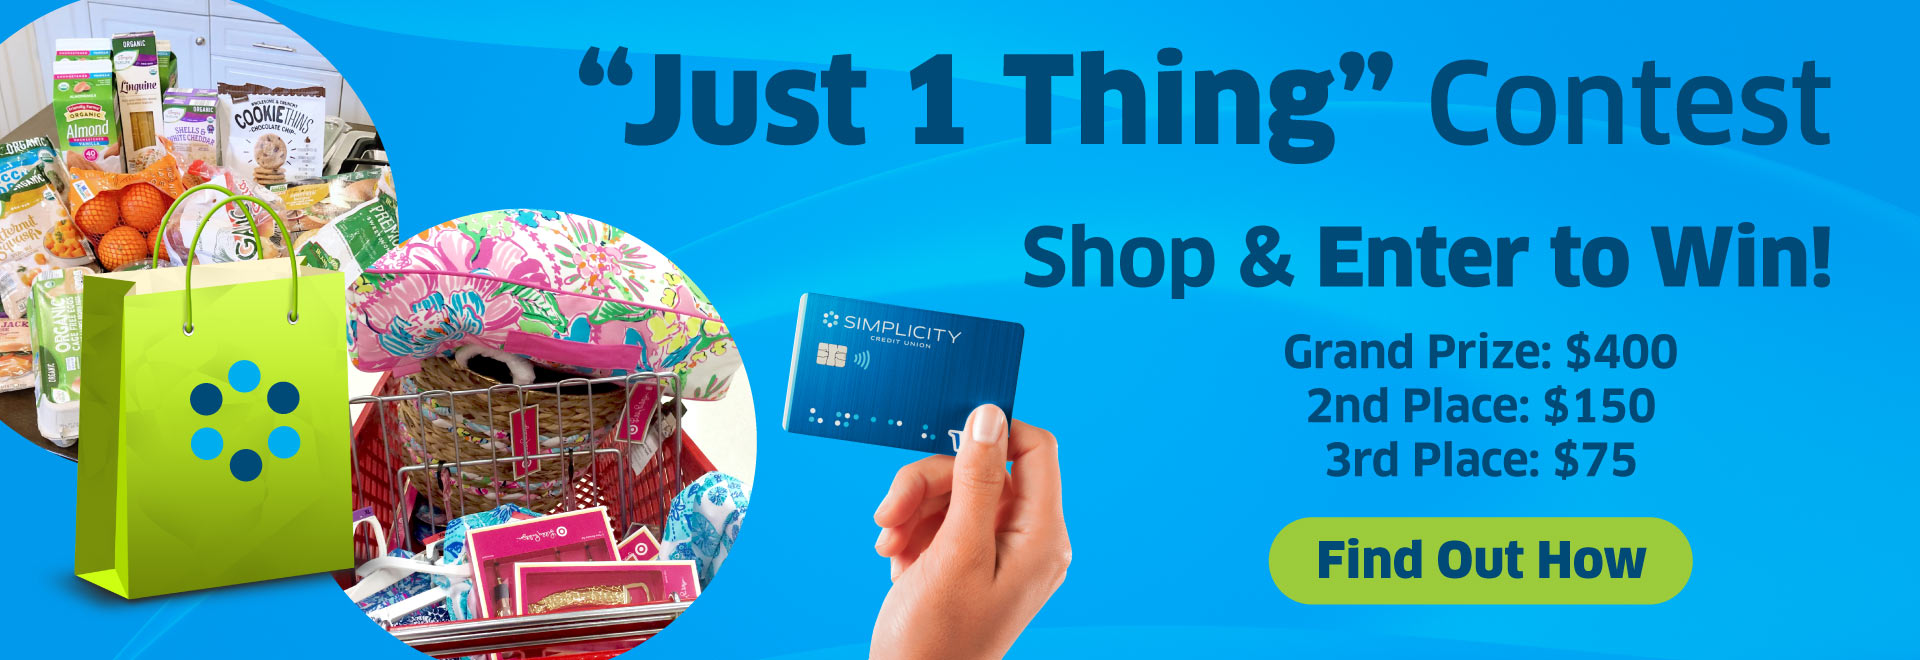 For Just 1 Thing or a Haul, Simplicity CU has a Debit Card for You!